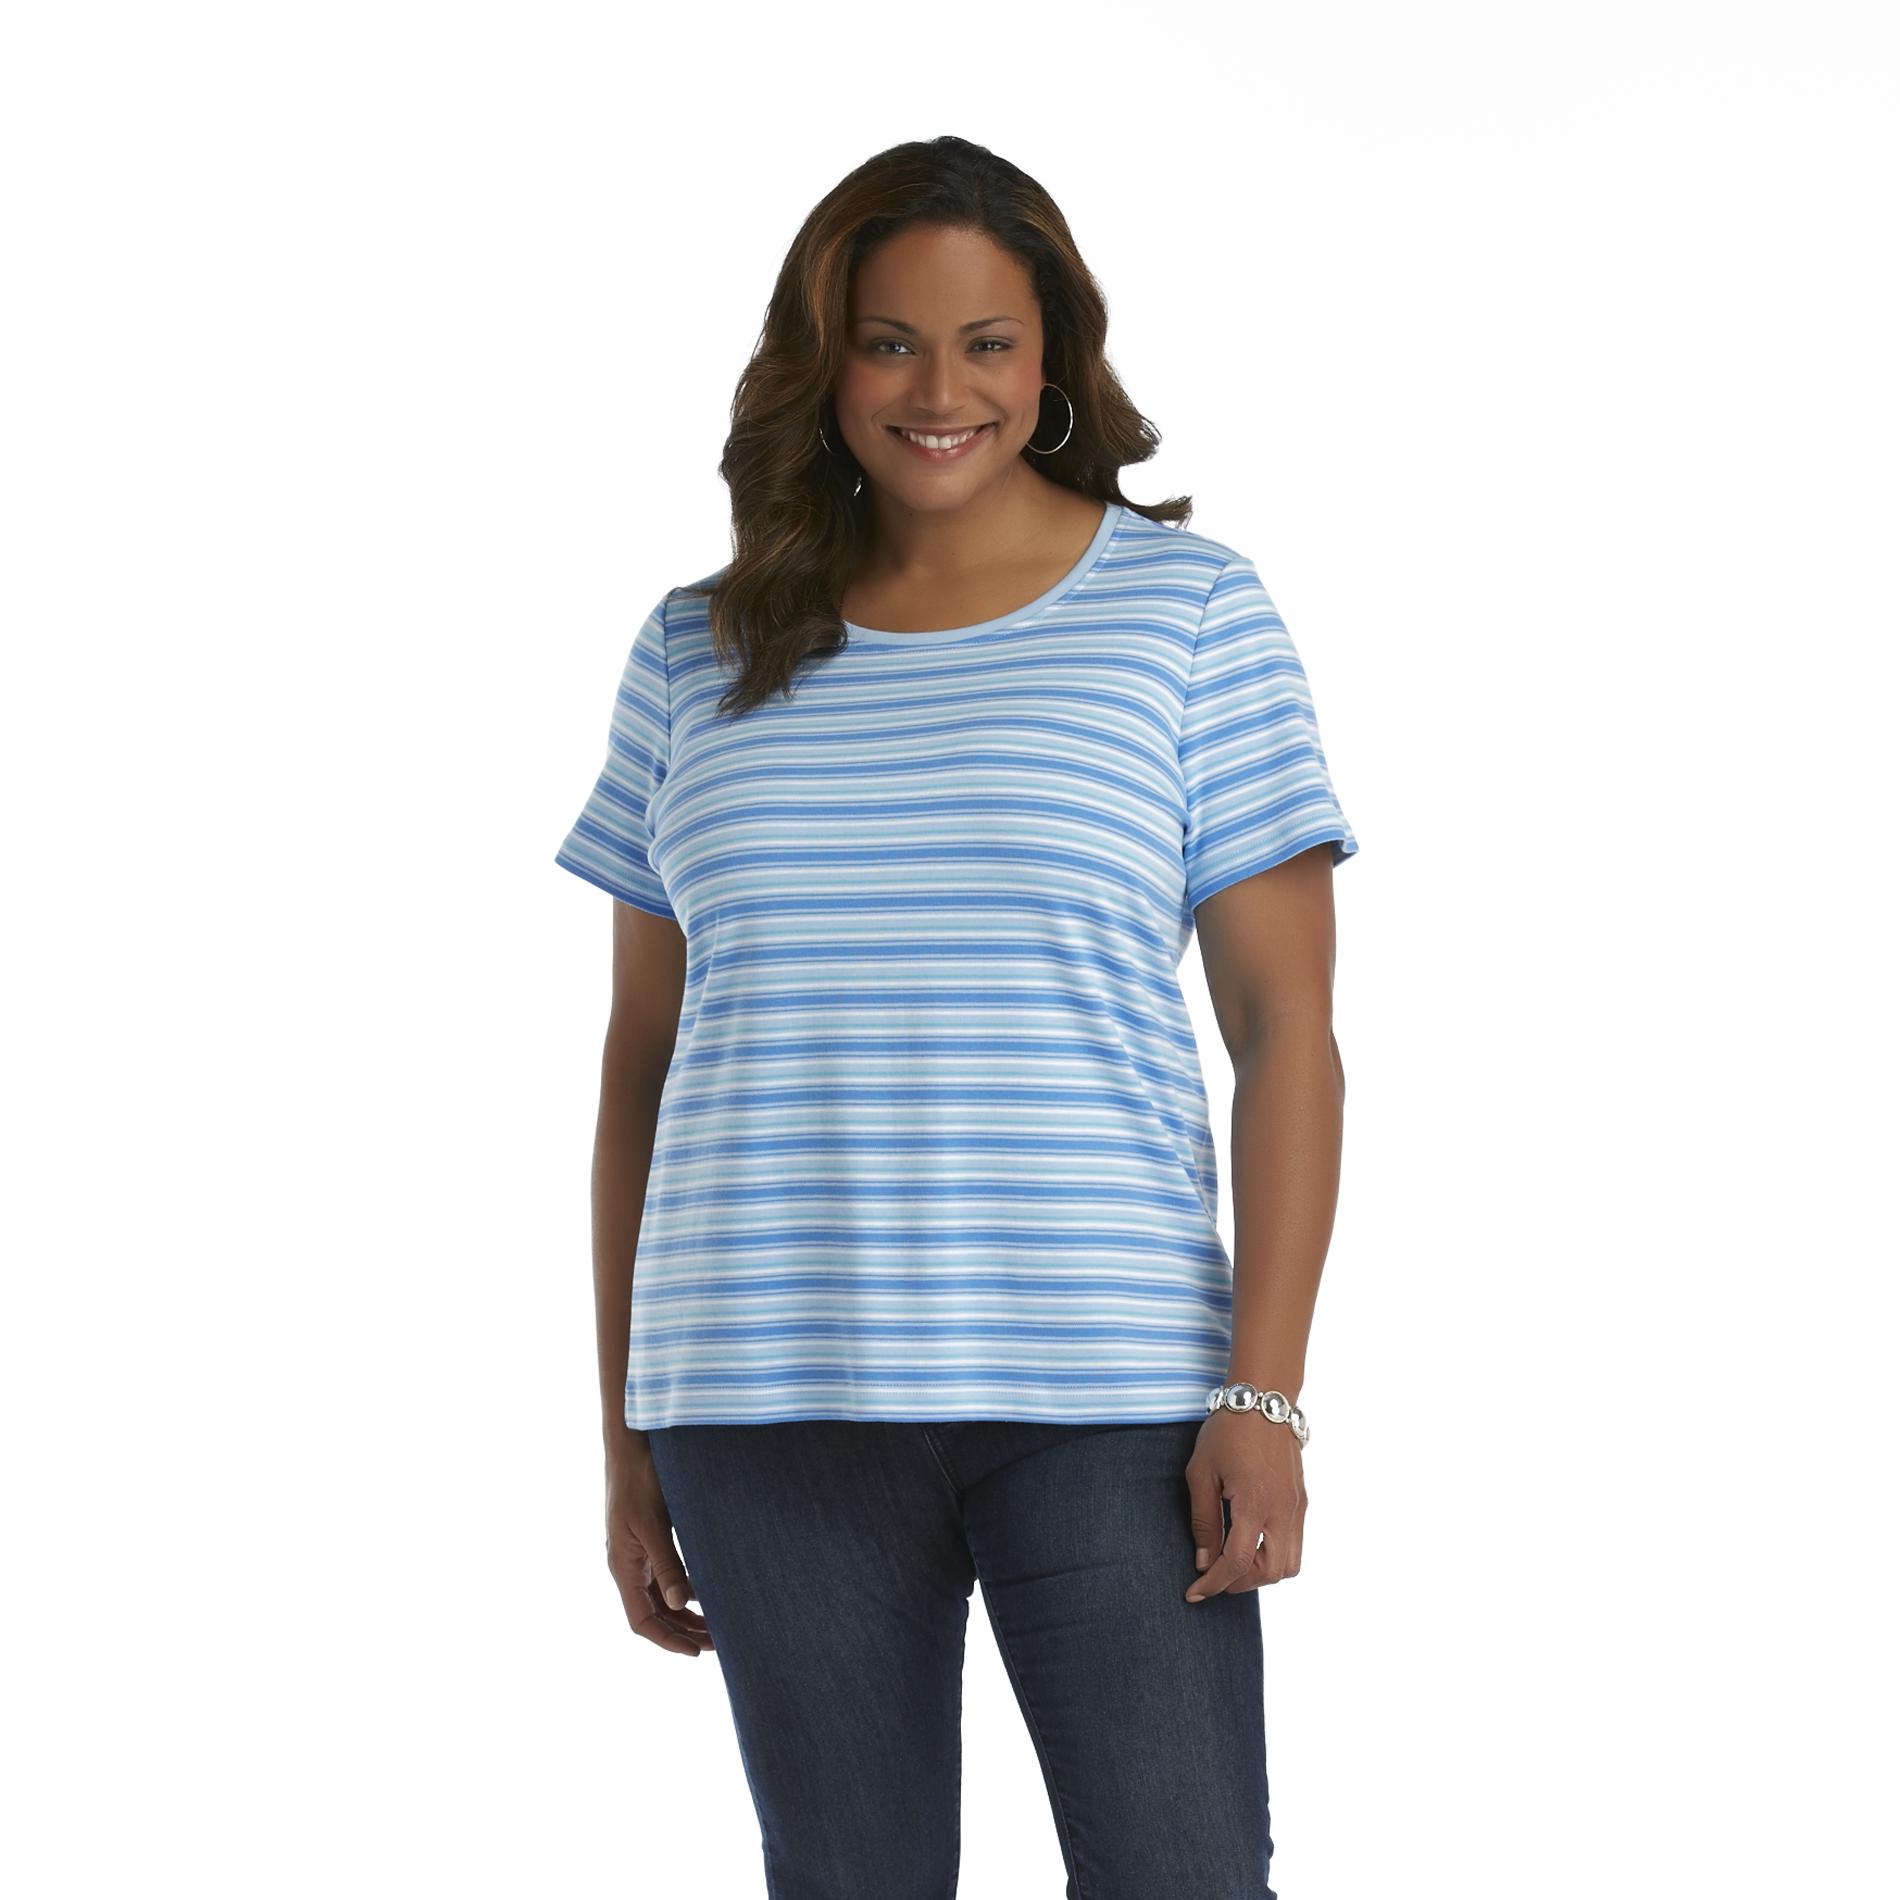 Basic Editions Women's Plus Relaxed Fit T-Shirt - Striped